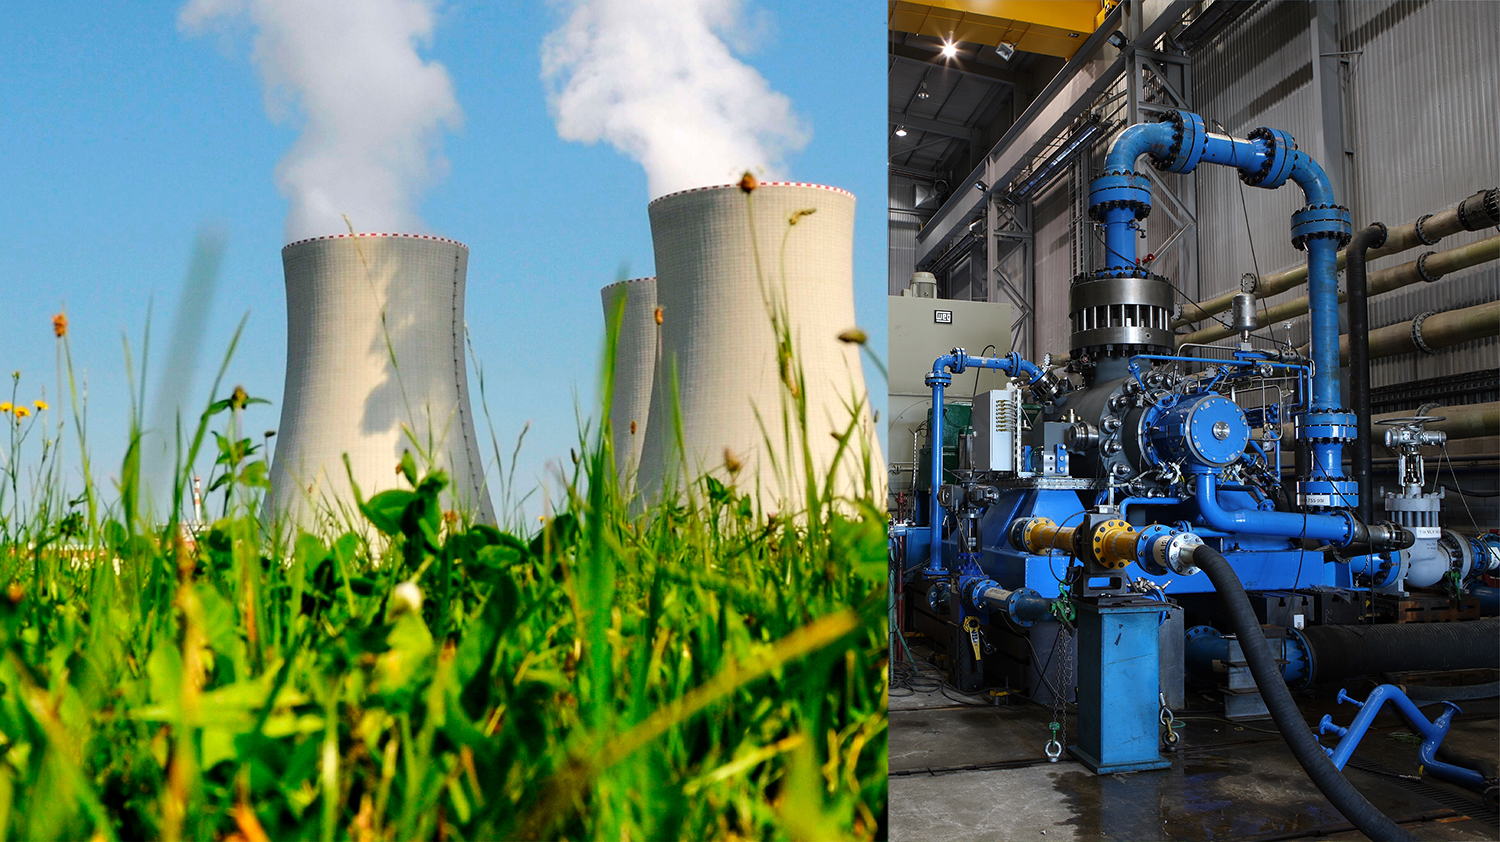 Sulzer’s dynamic, bespoke pump retrofit service means that the operational needs of any thermal power plant can be met optimally and cost-effectively.